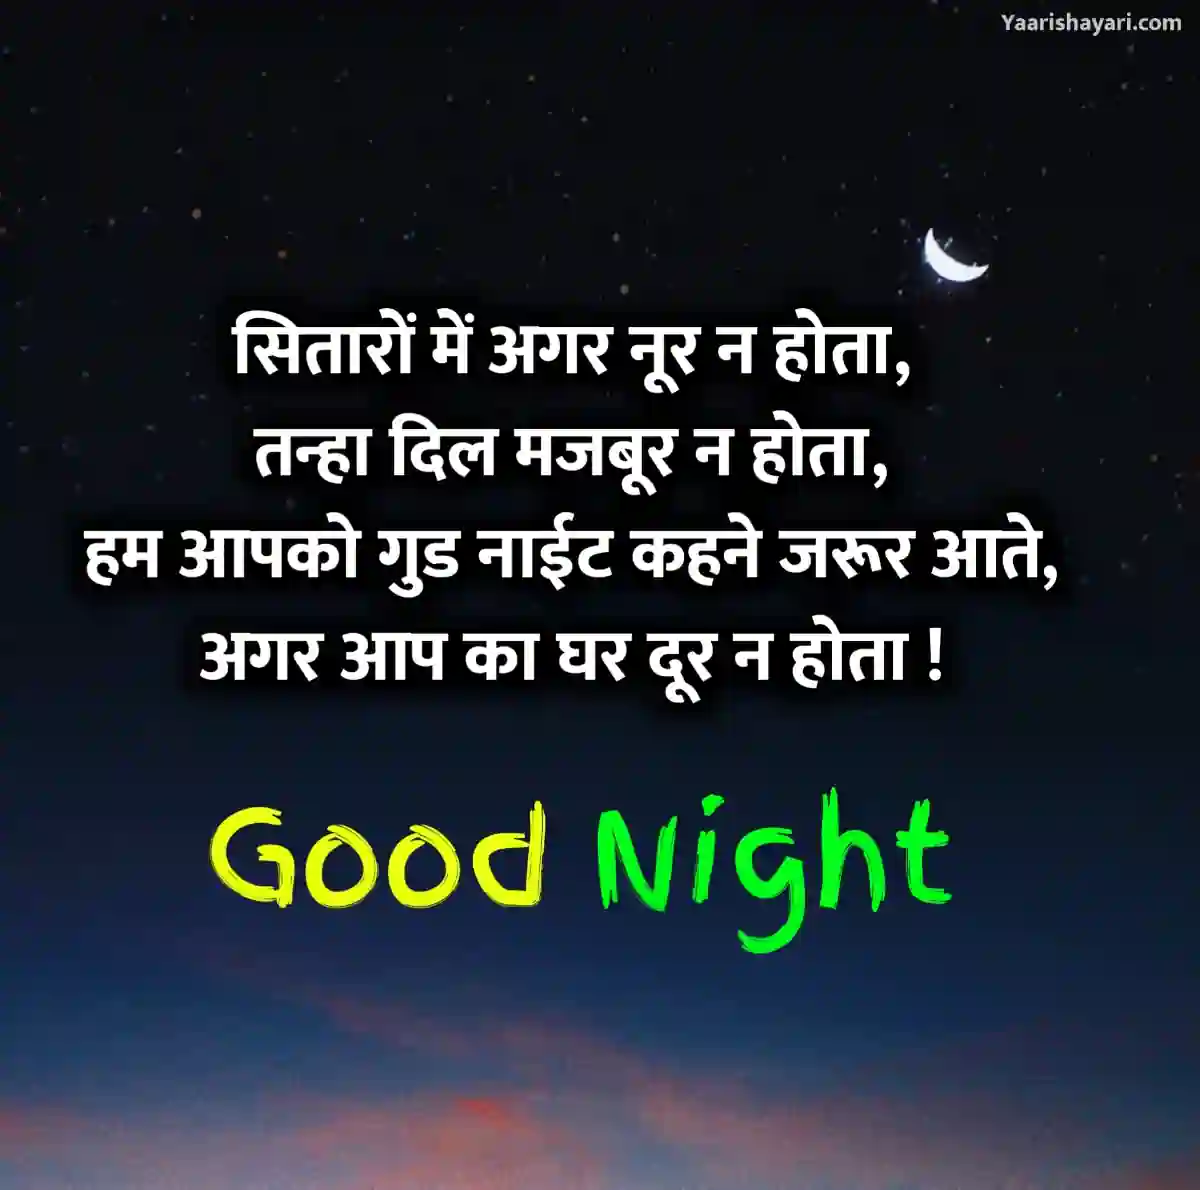 Best Good Night Messages in Hindi